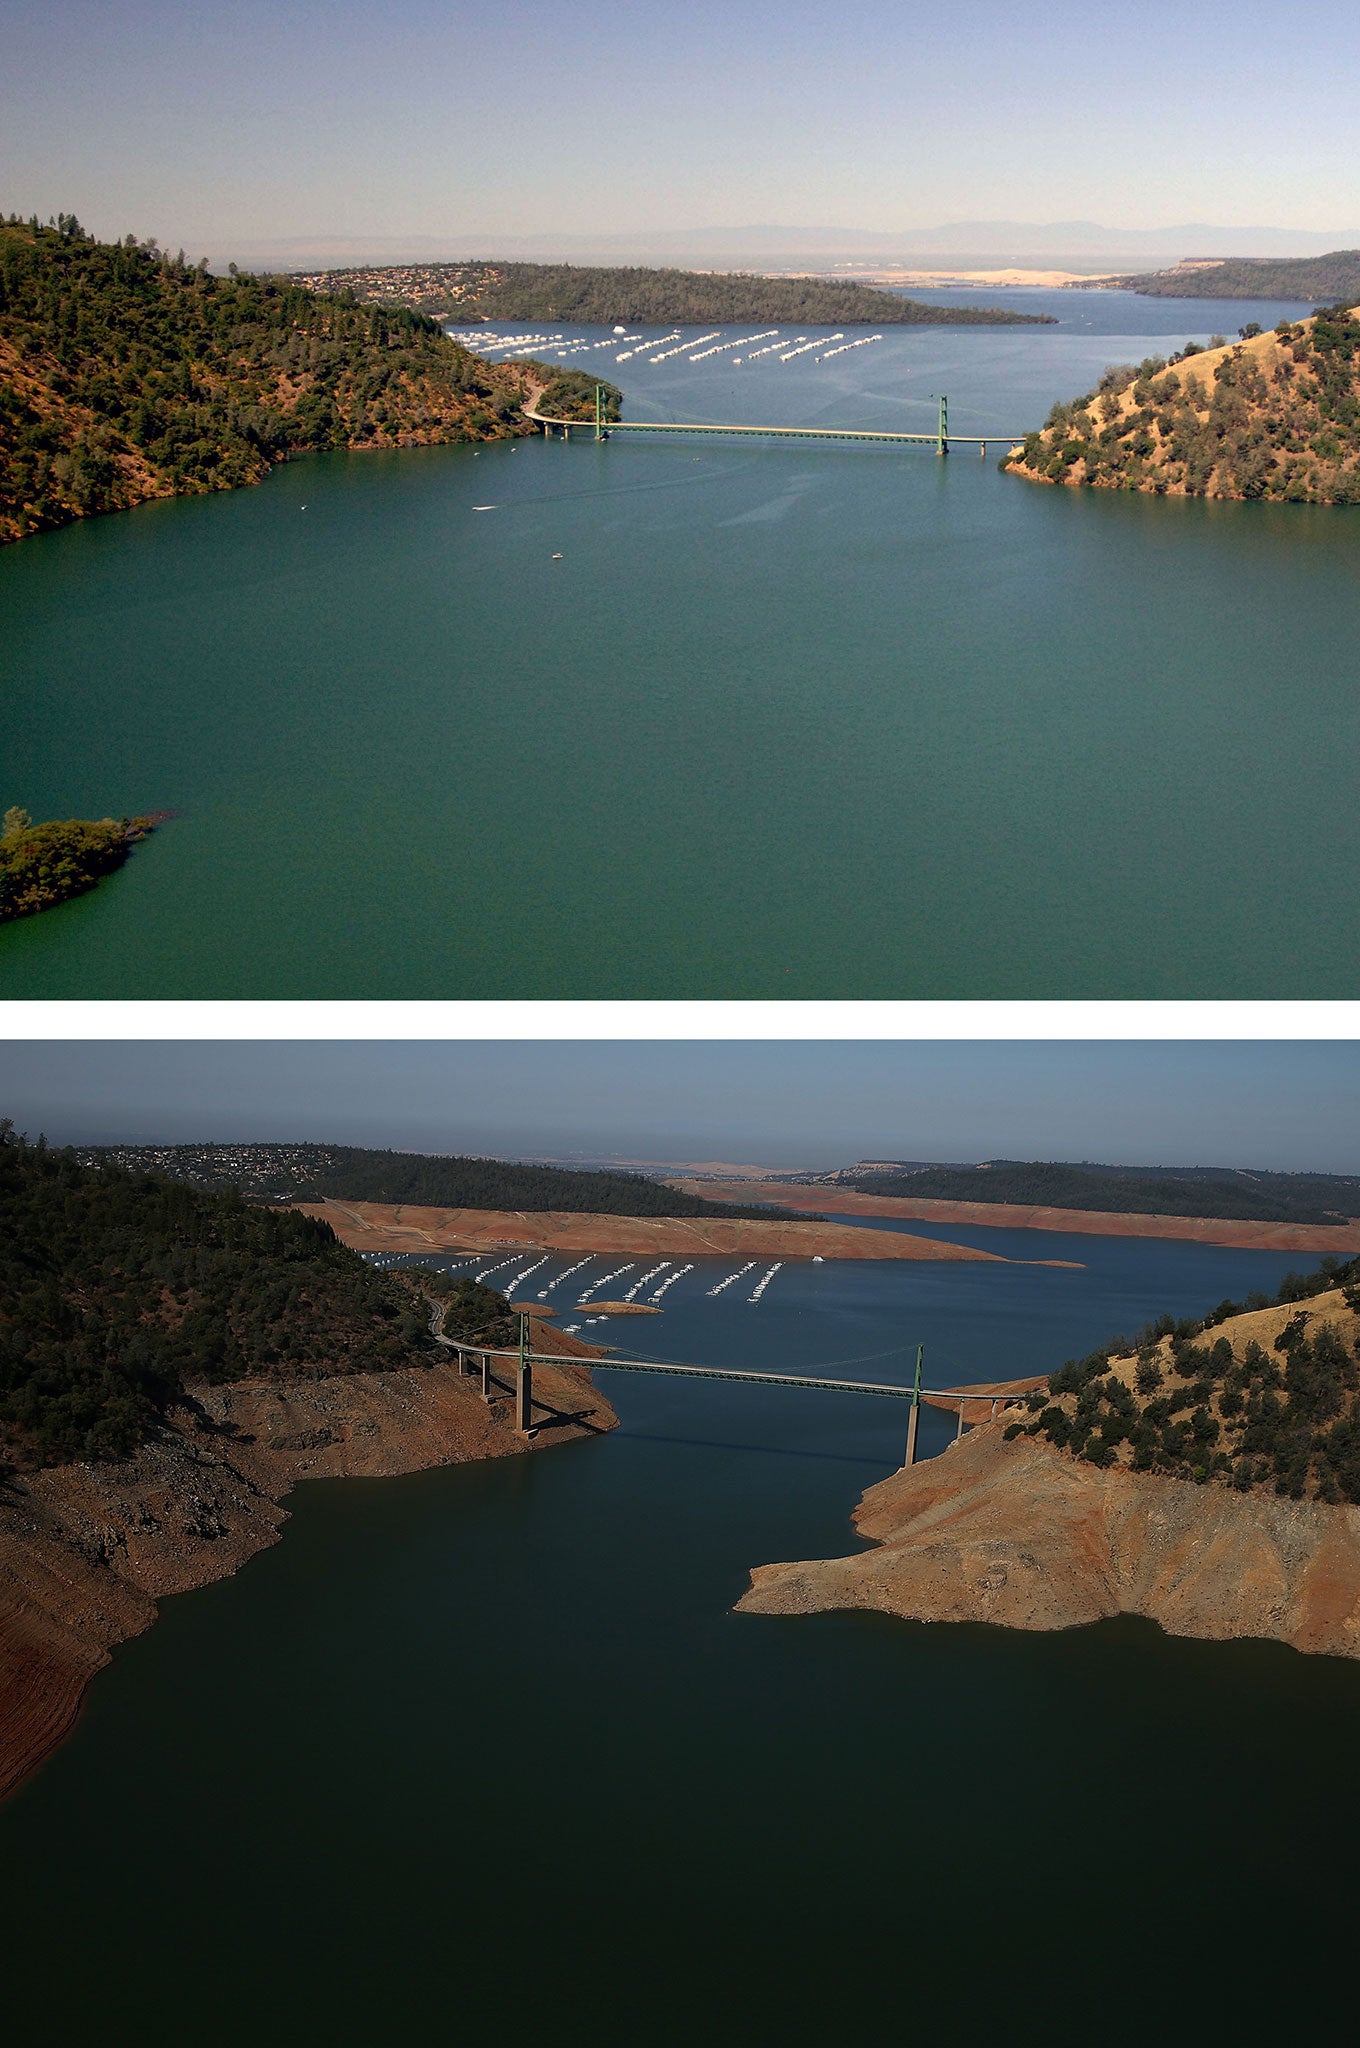 Above: High and low water levels at a section of Lake Oroville near the Bidwell Marina in Oroville, California pictured in 2011 and 19 August 2014